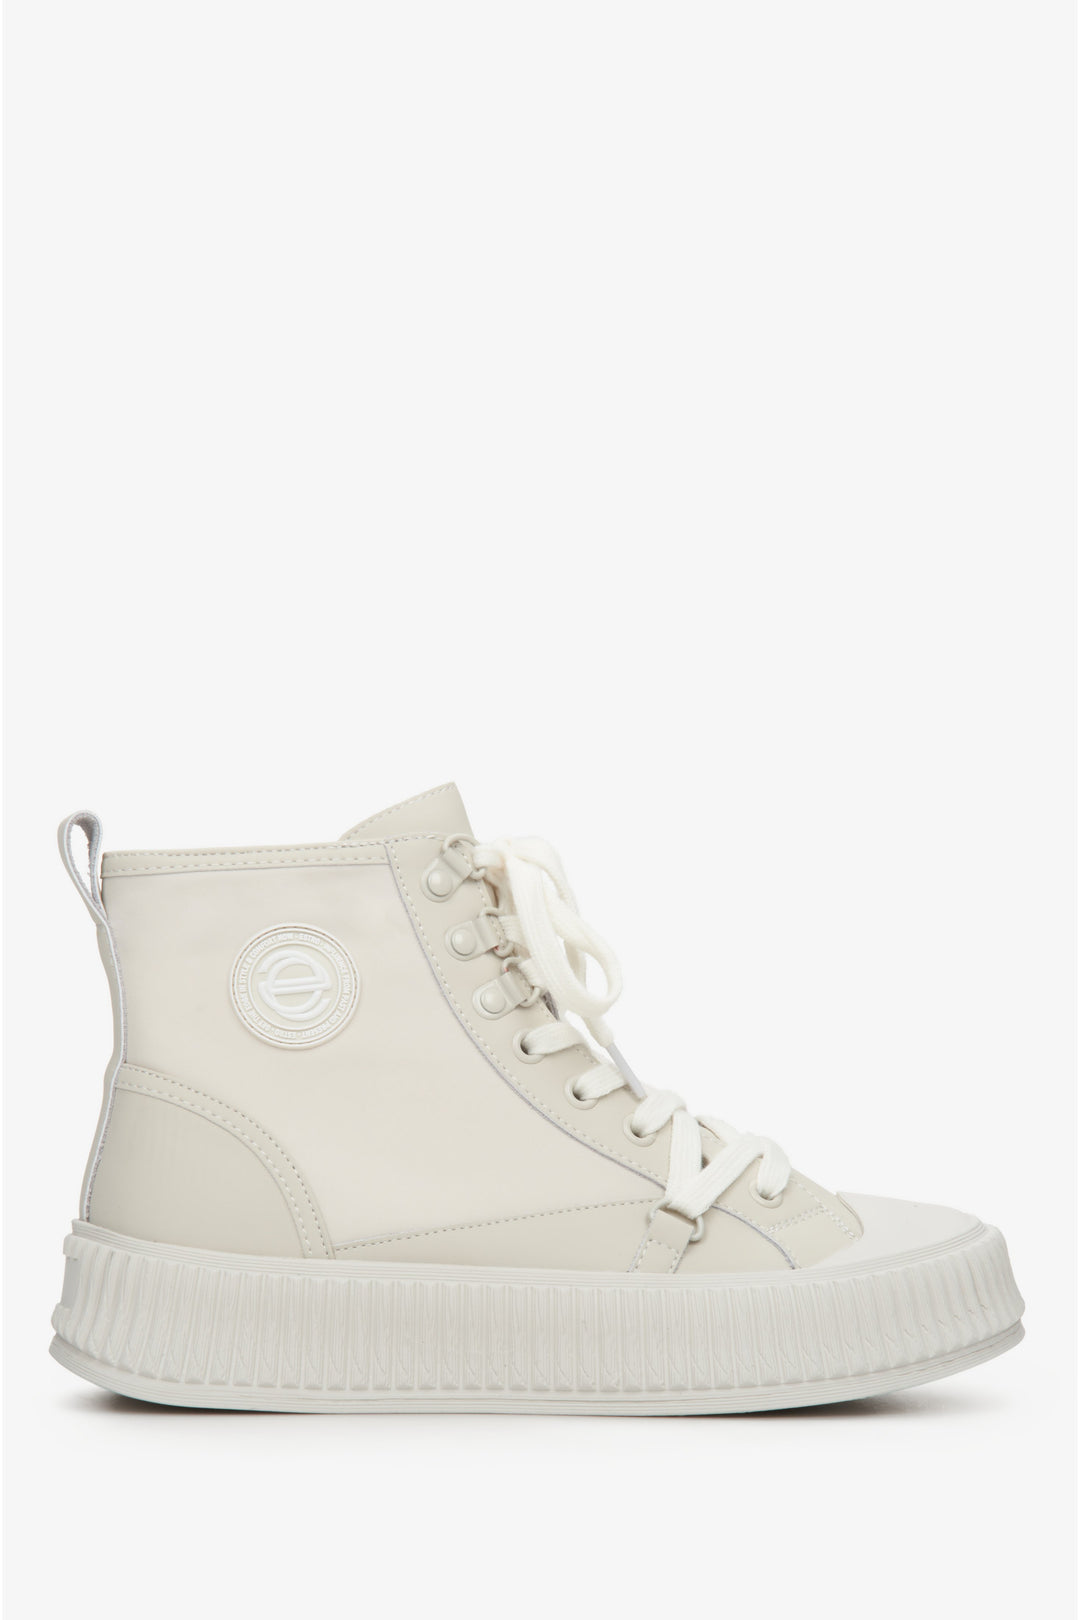 Women's Light Beige High-Top Sneakers made of Genuine Leather Estro ER00112709.